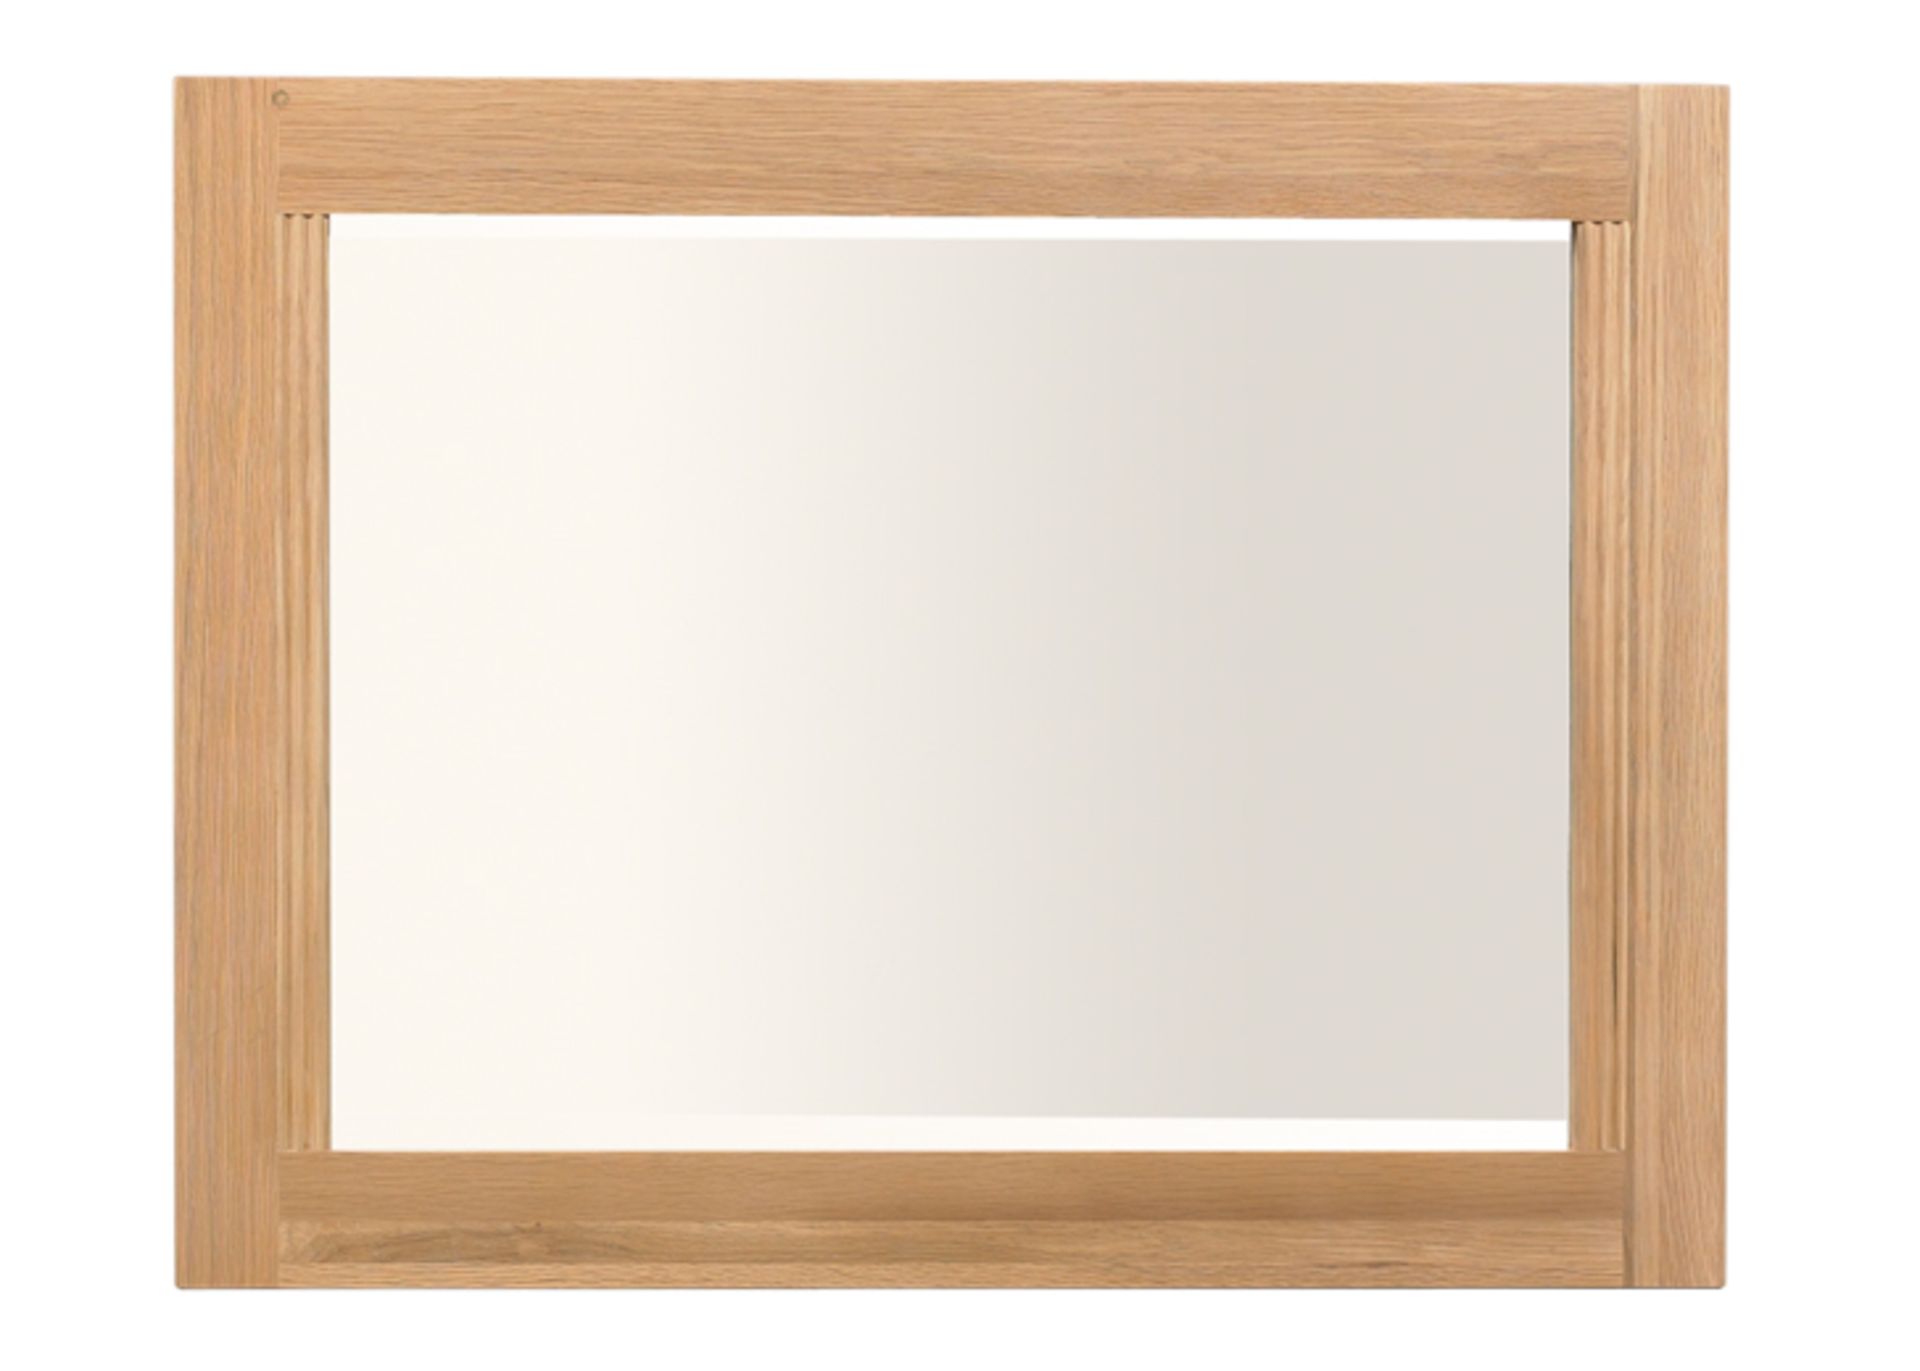 1 x Mark Webster Buckingham Wall Mirror - White Wash Oak With a Timeless Design - Full of - Image 2 of 3